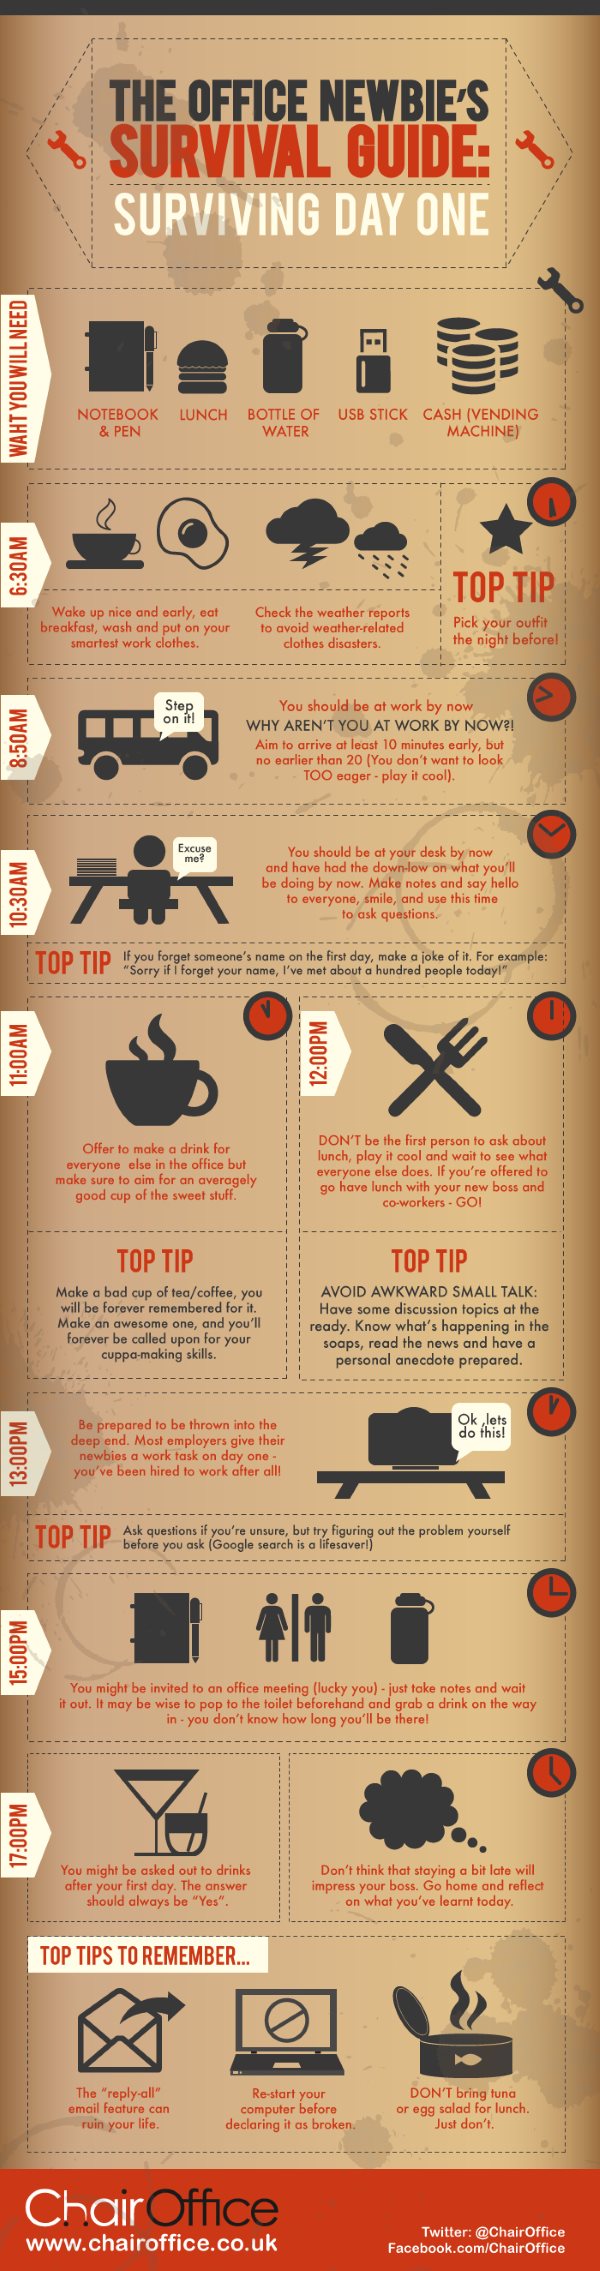 office-survival-guide